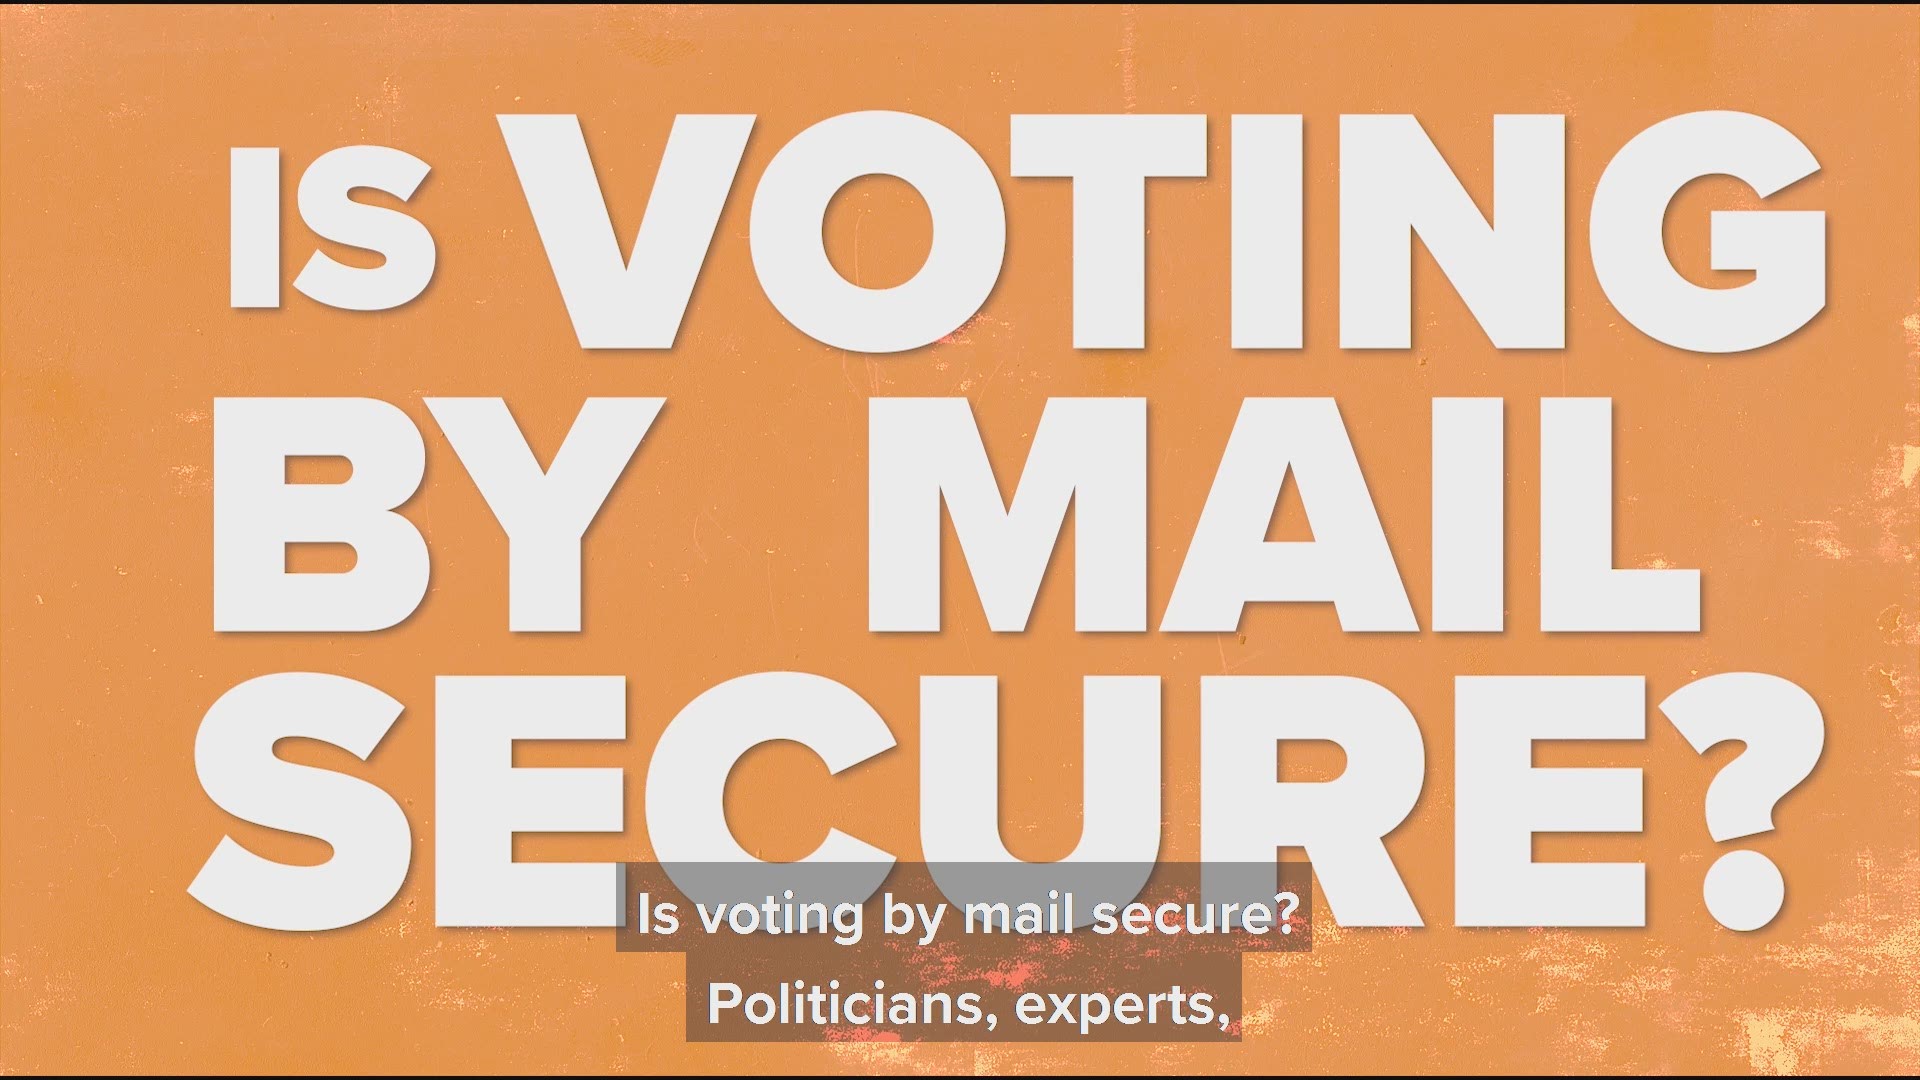 An election security expert weighs in on the pros and cons of voting by mail.